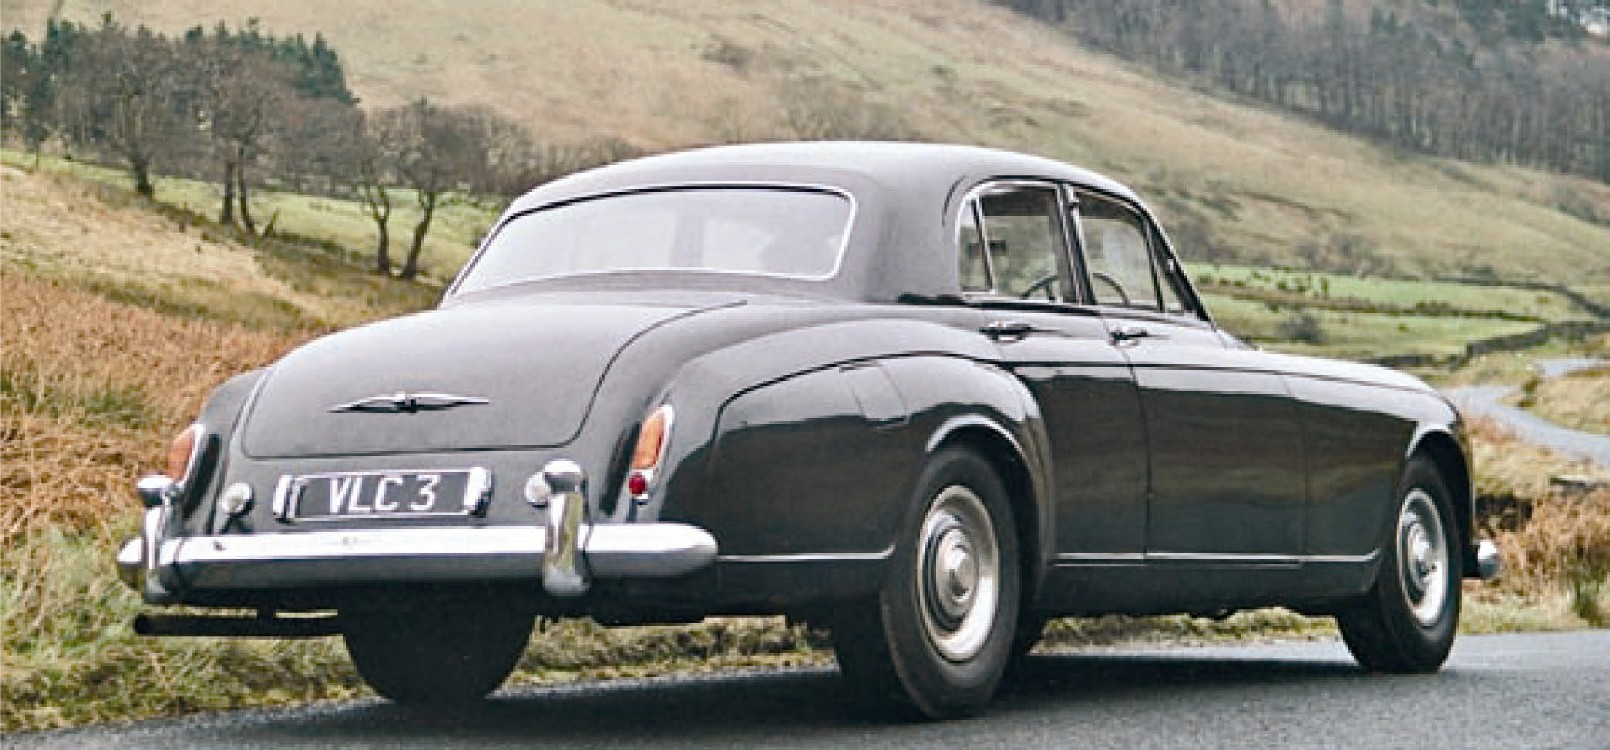 bentley s1 continental flying spur-pic. 2